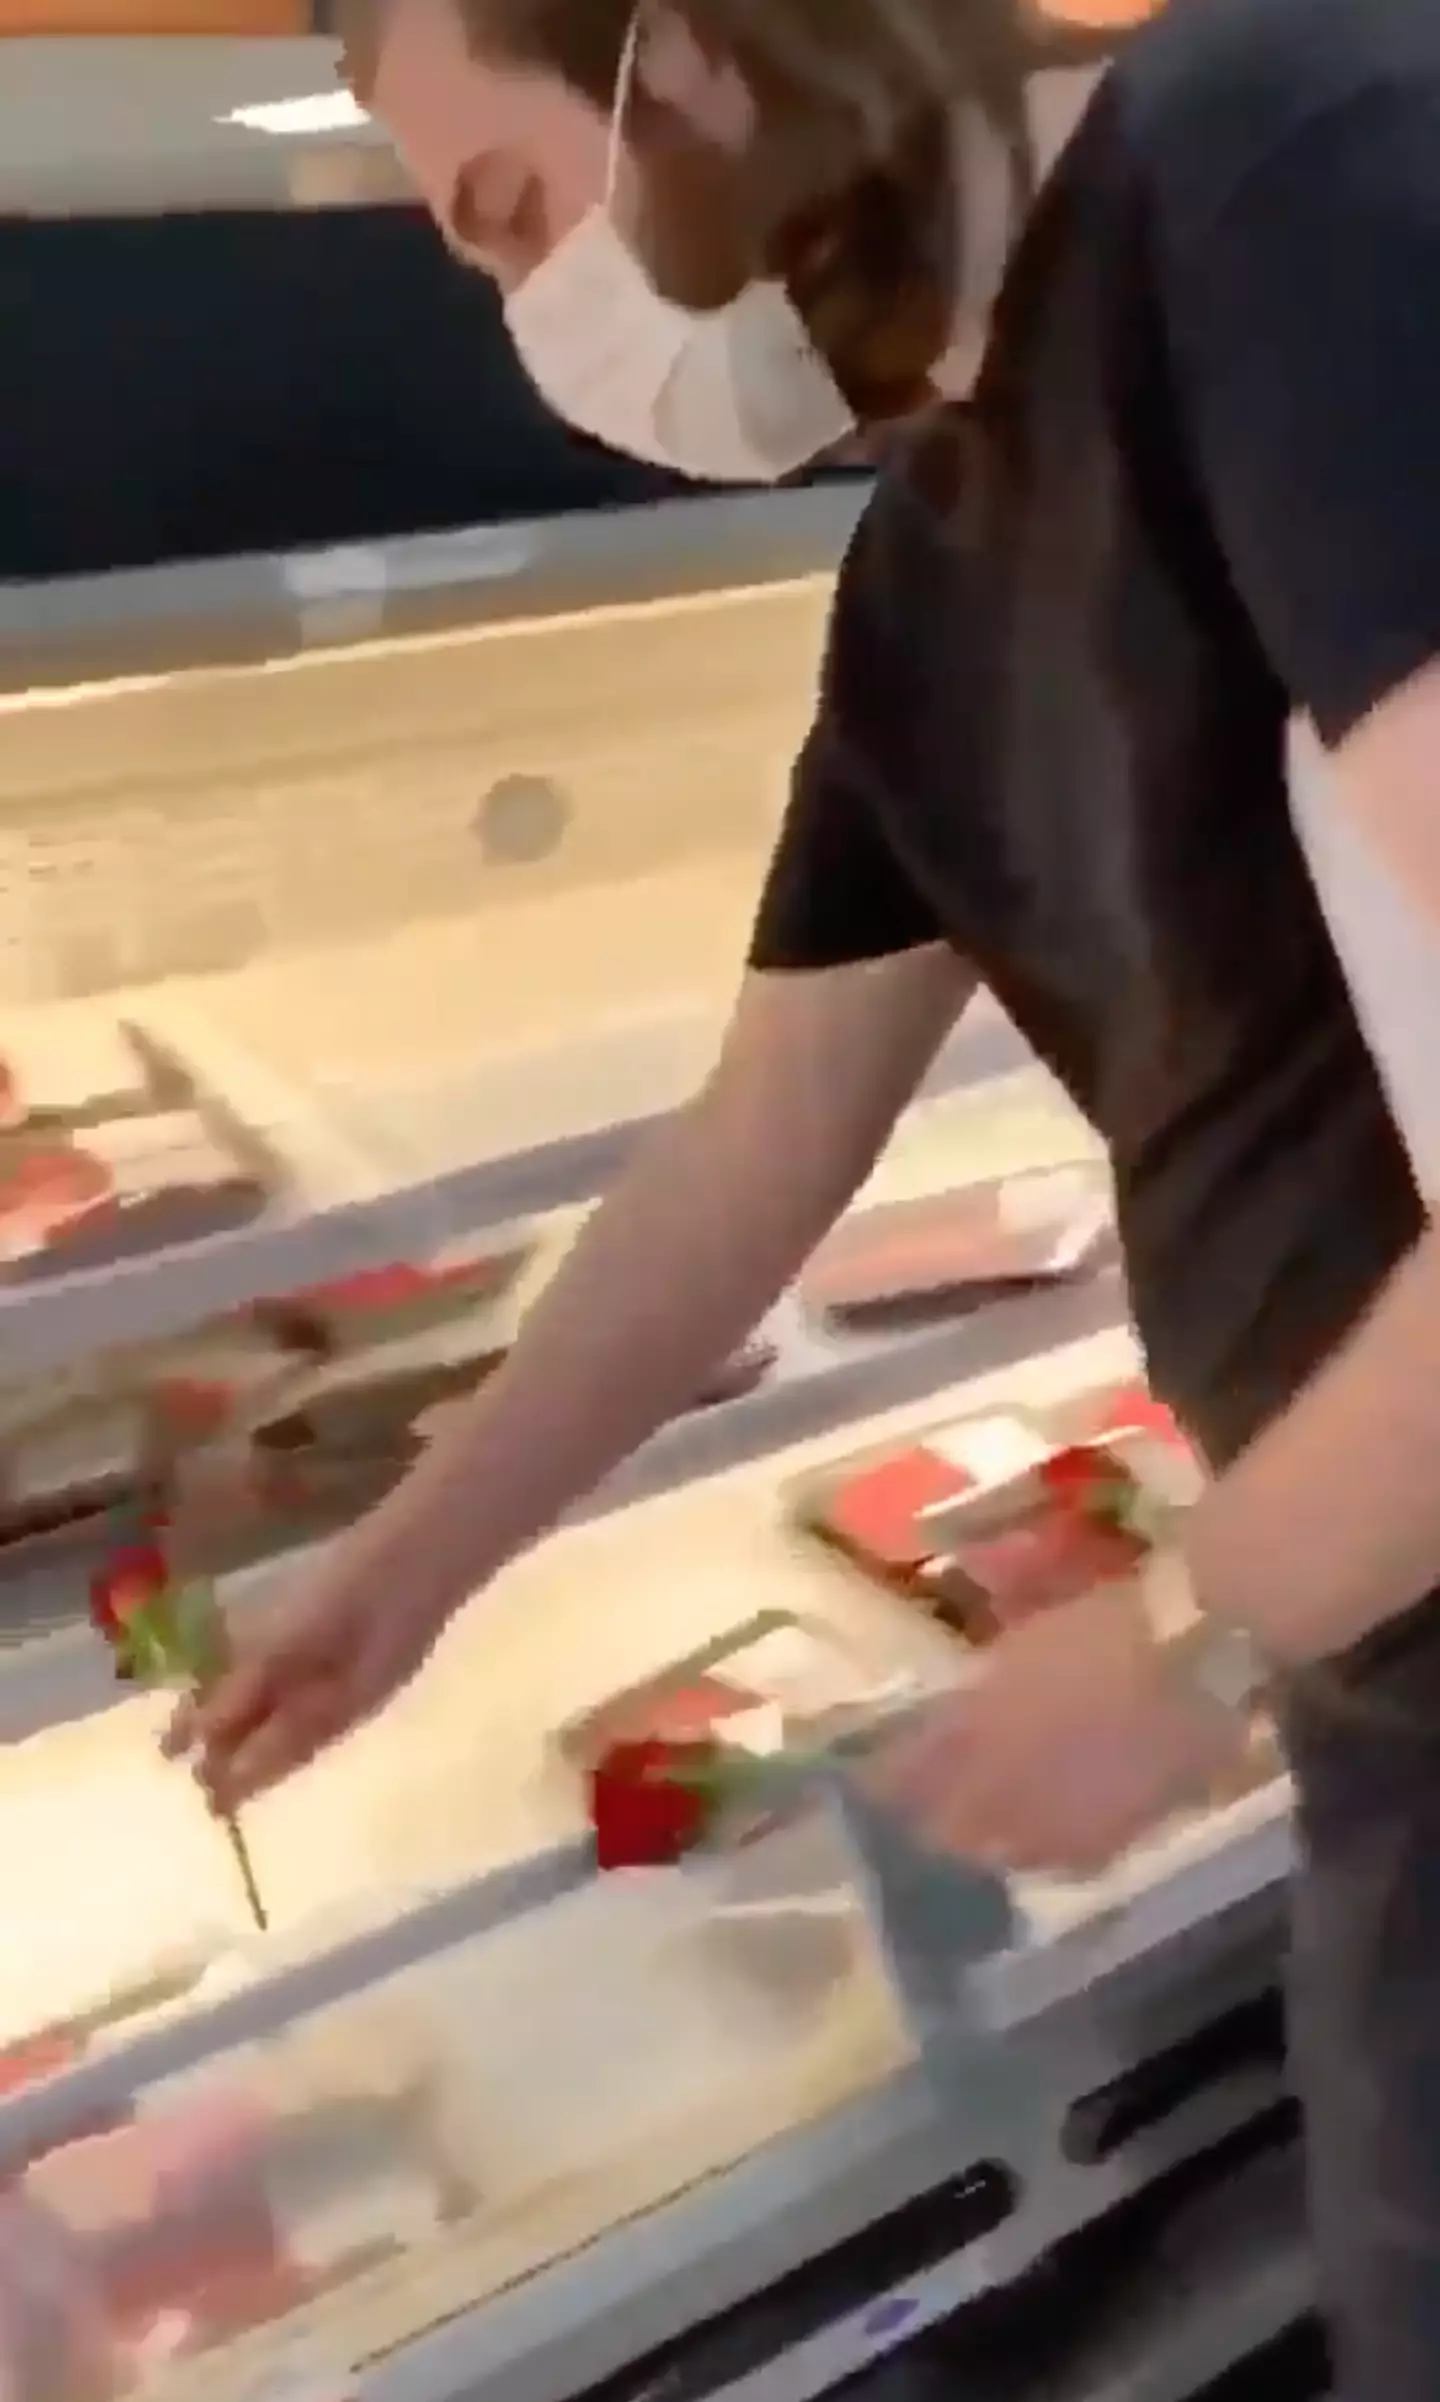 The vegans can be seen placing roses on top of the meat.